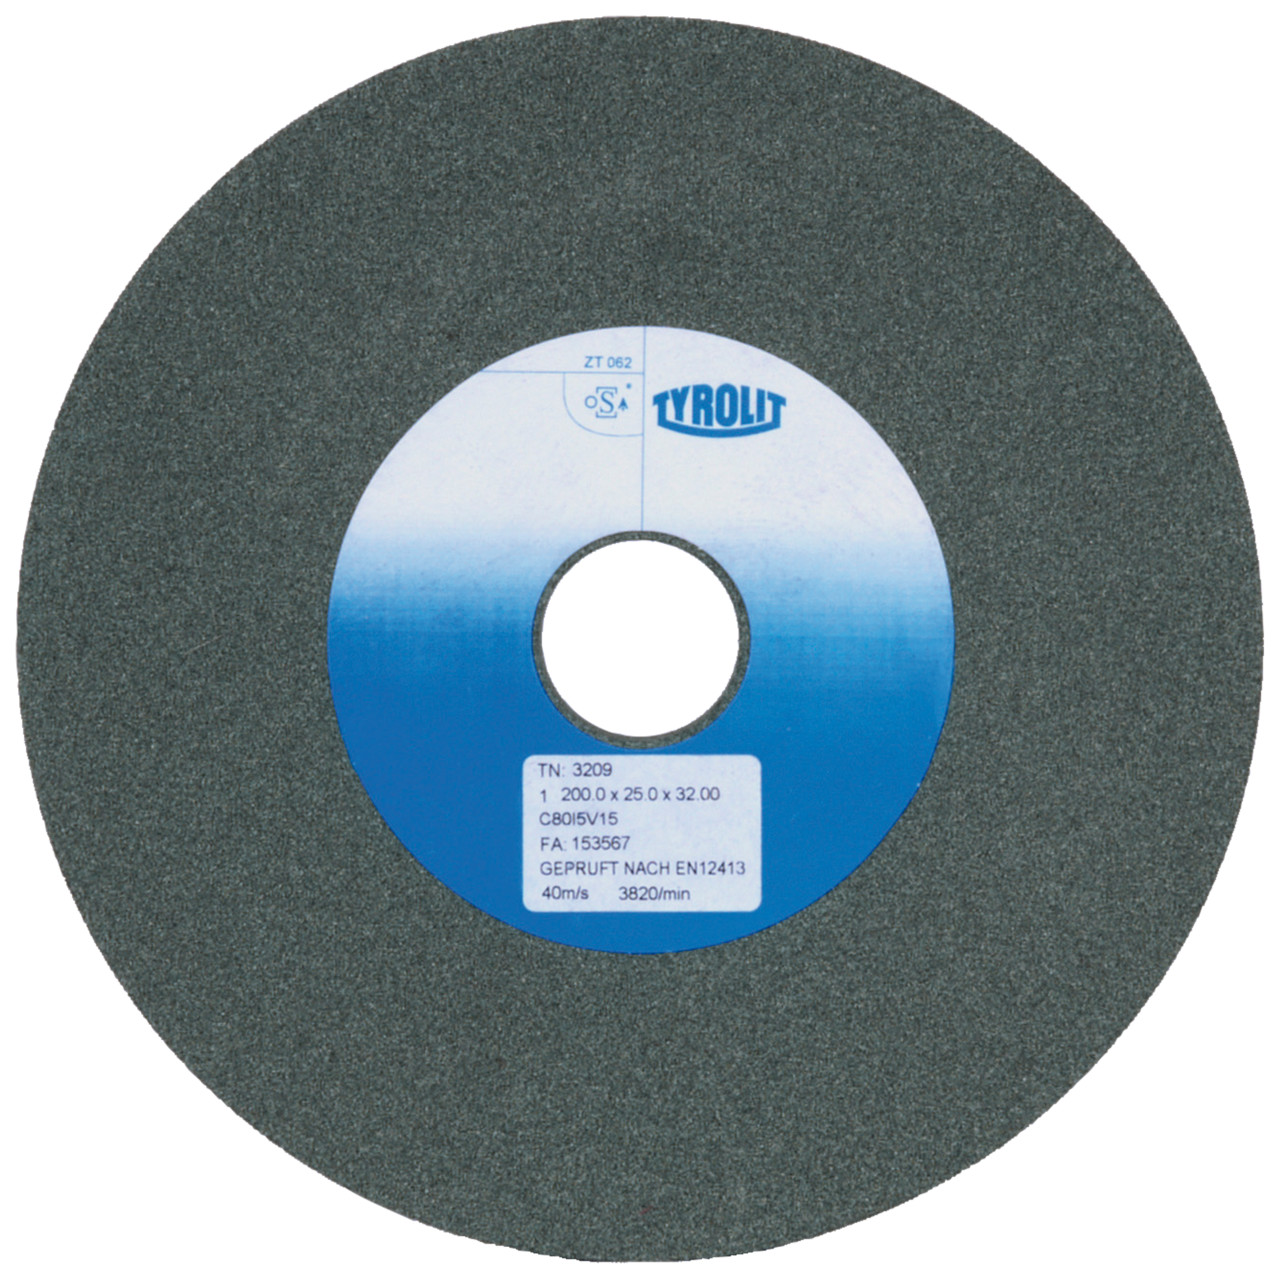 Tyrolit Conventional ceramic grinding discs DxDxH 203x20x32 For carbide and cast iron, shape: 1, Art. 72045